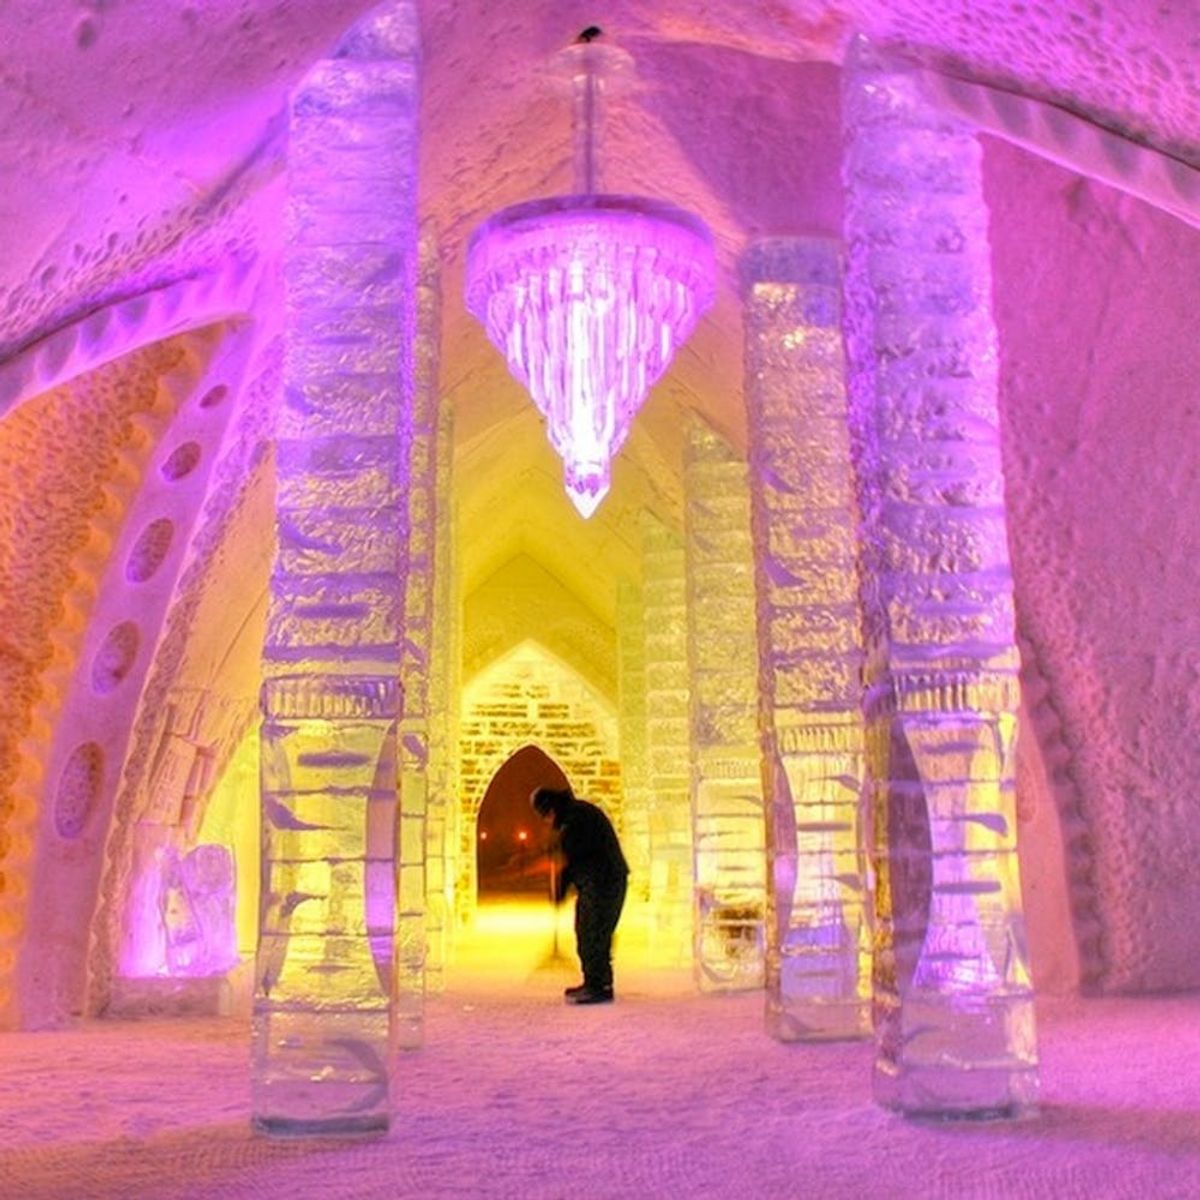 12 Ice Hotels That Will Make You Actually LIKE the Cold